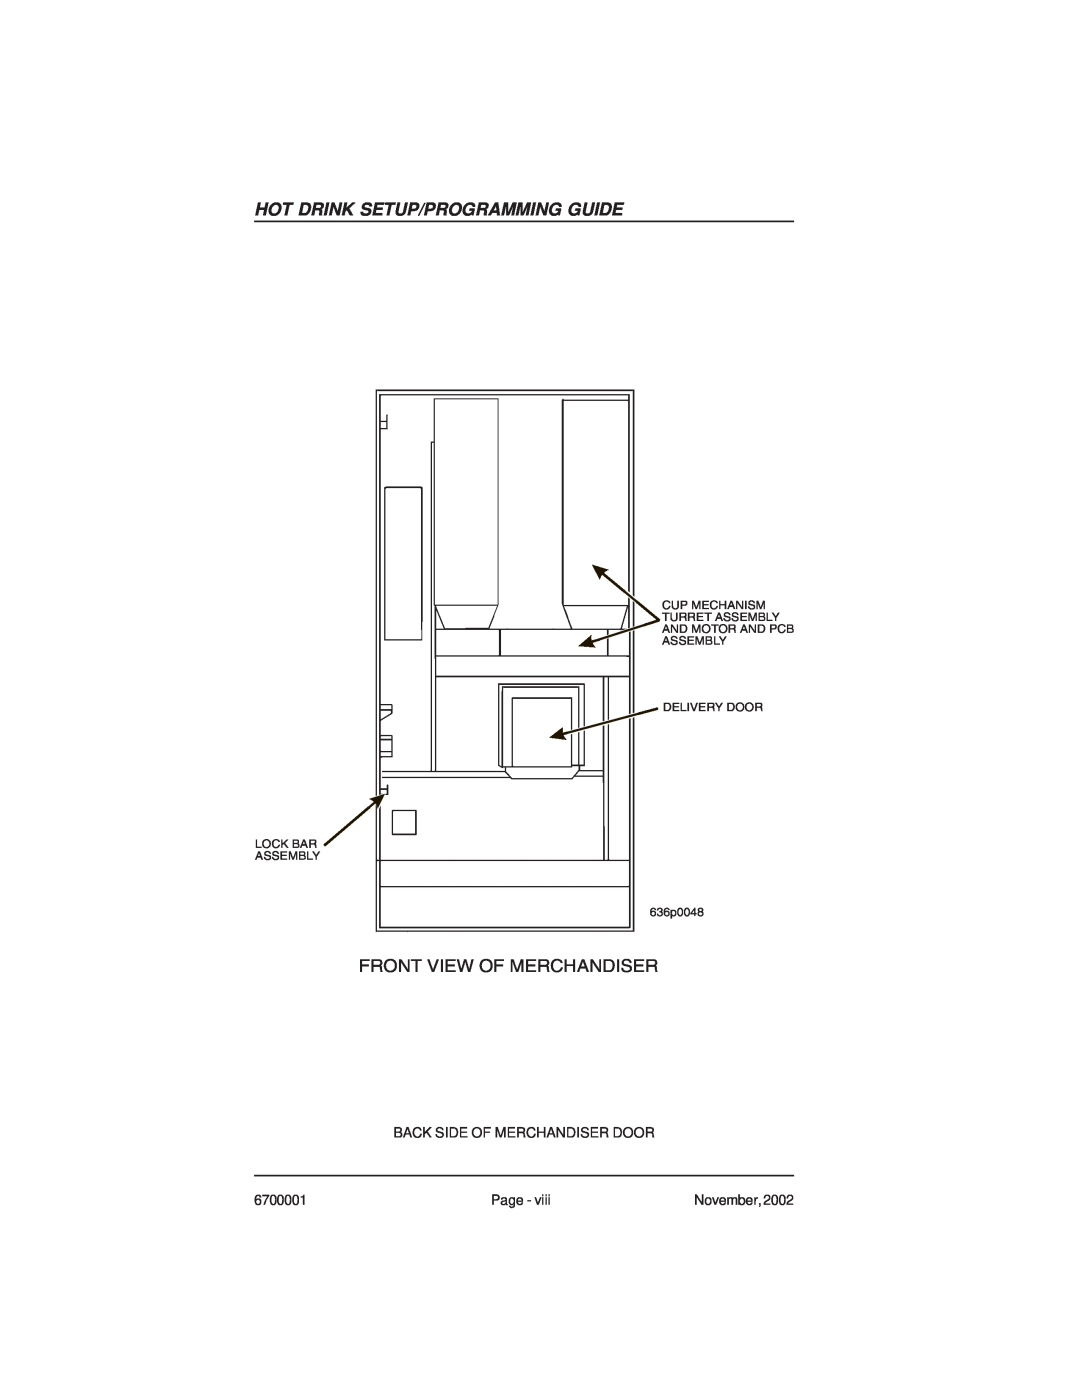 Crane Merchandising Systems 670, 678 manual Hot Drink Setup/Programming Guide, Front View Of Merchandiser 